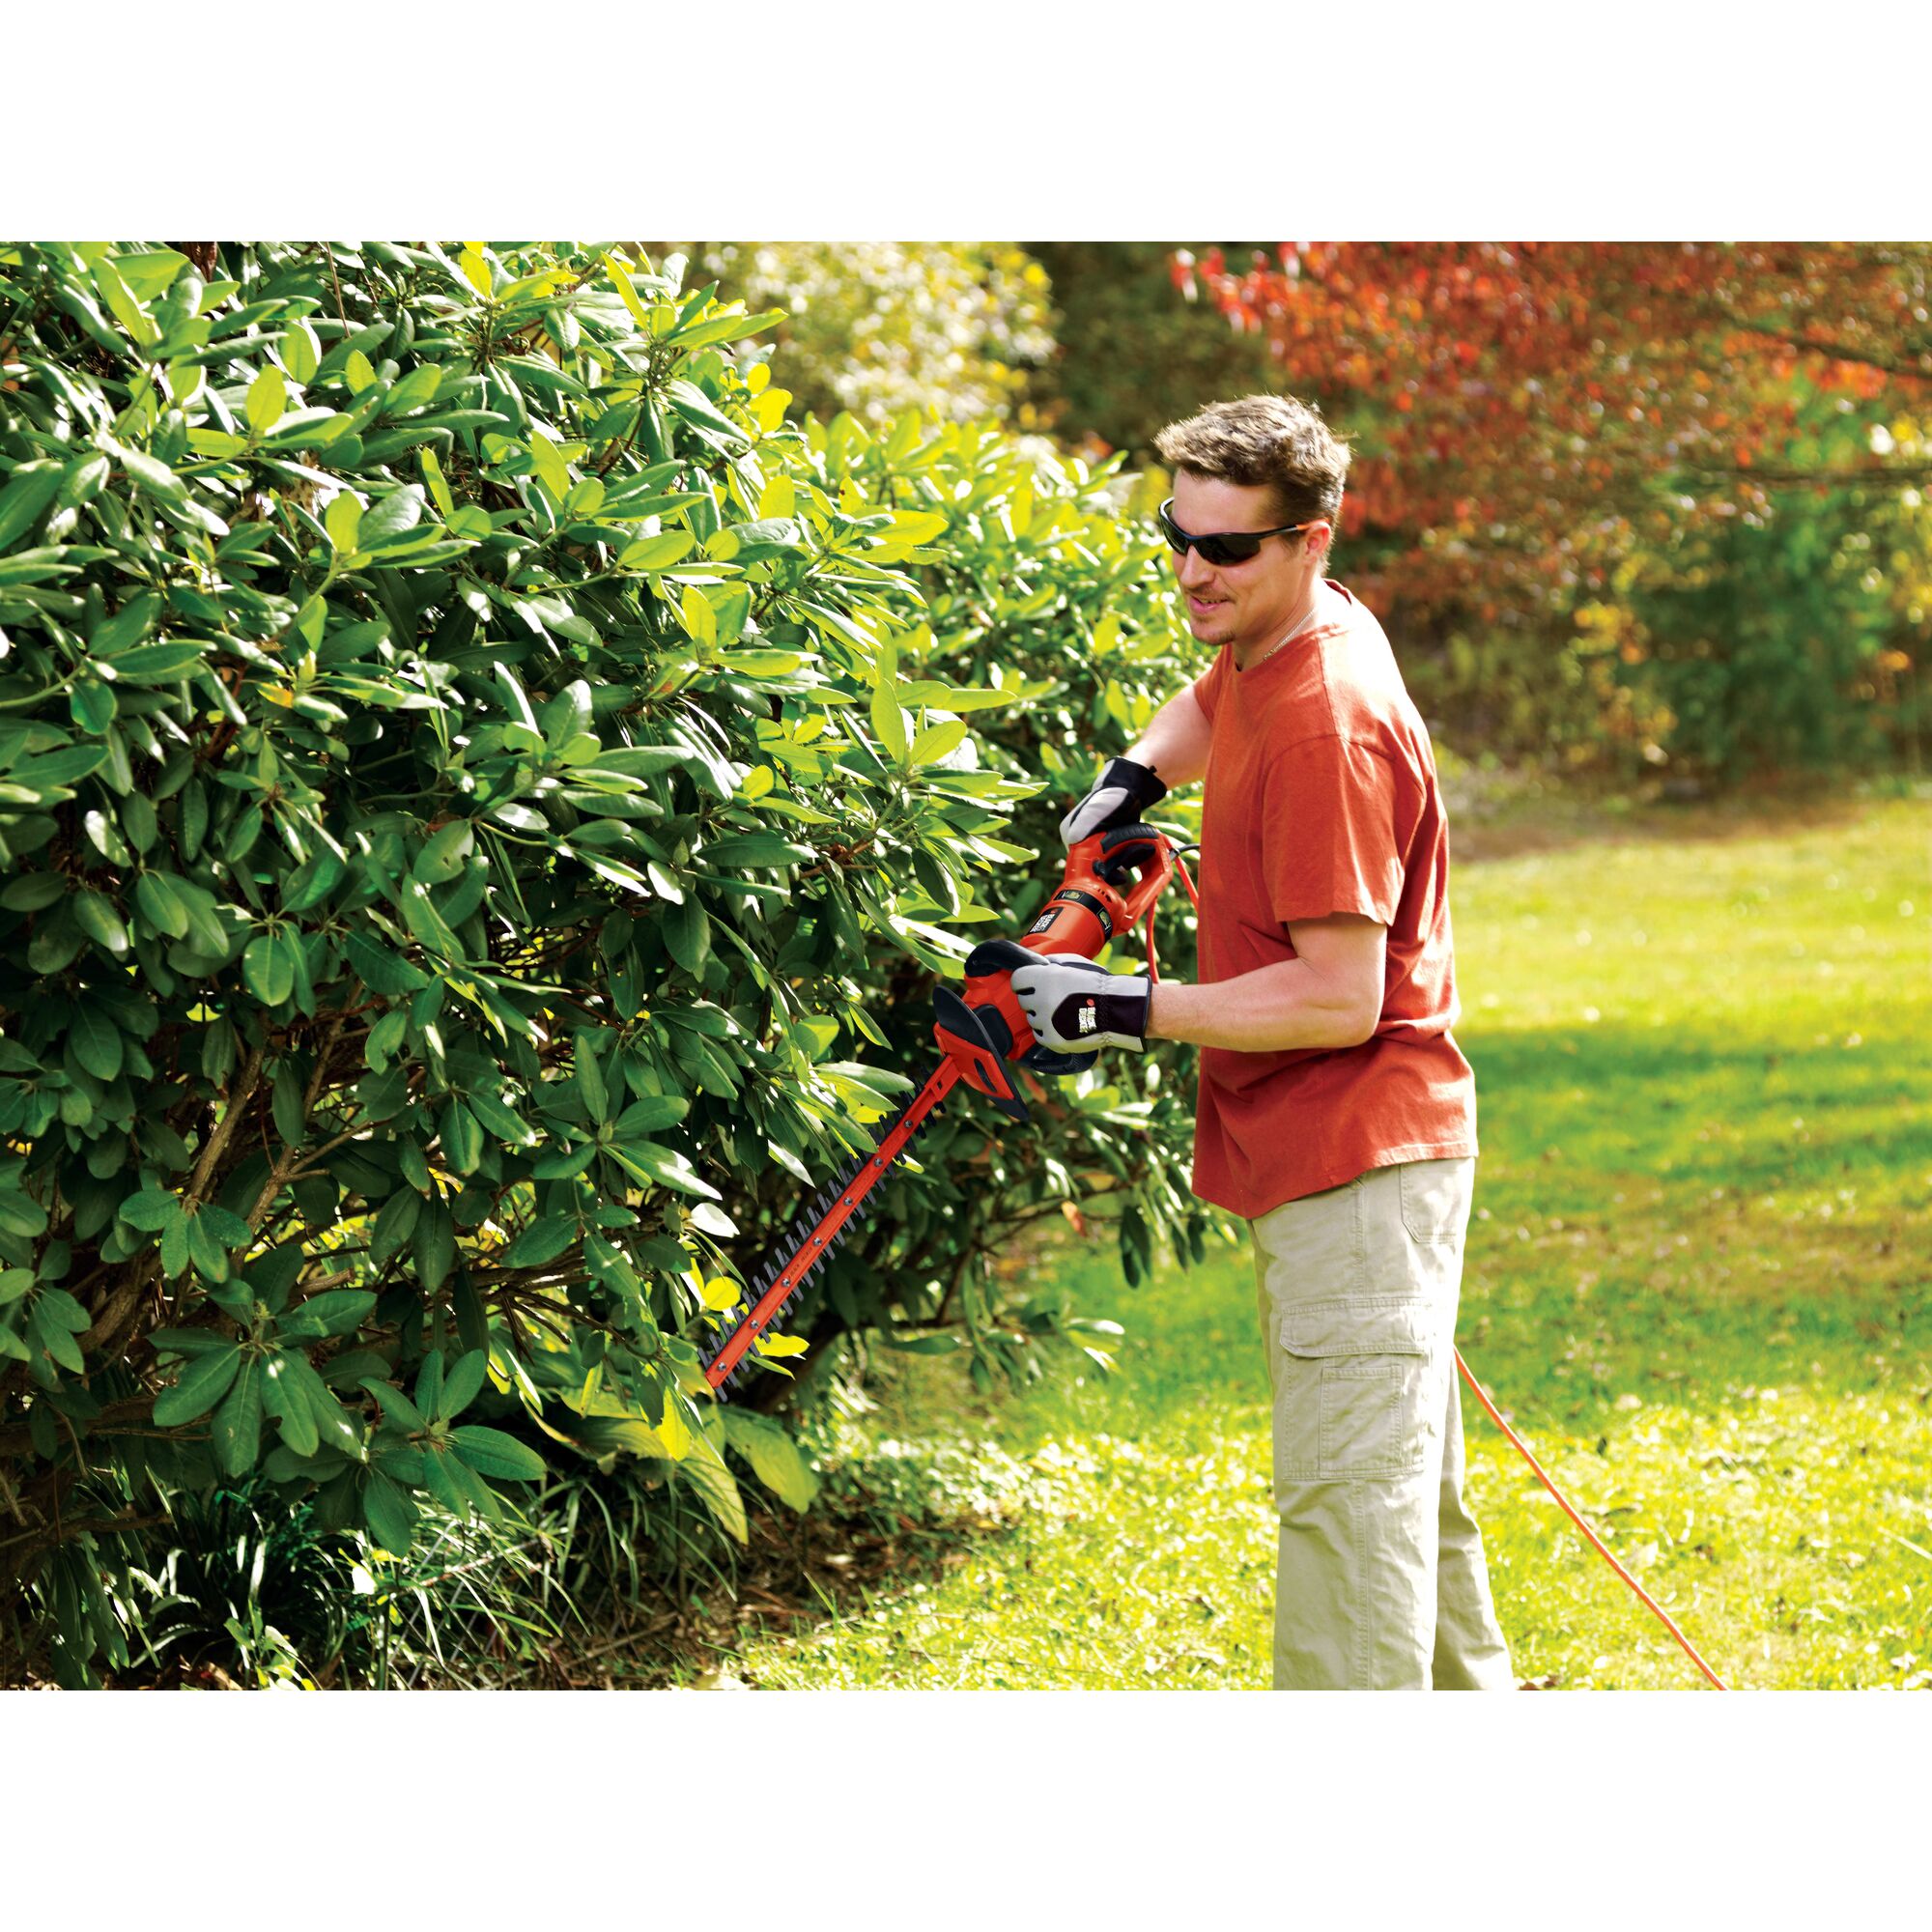 24 inch Hedge Trimmer with Rotating Handle being used for trimming bushes.